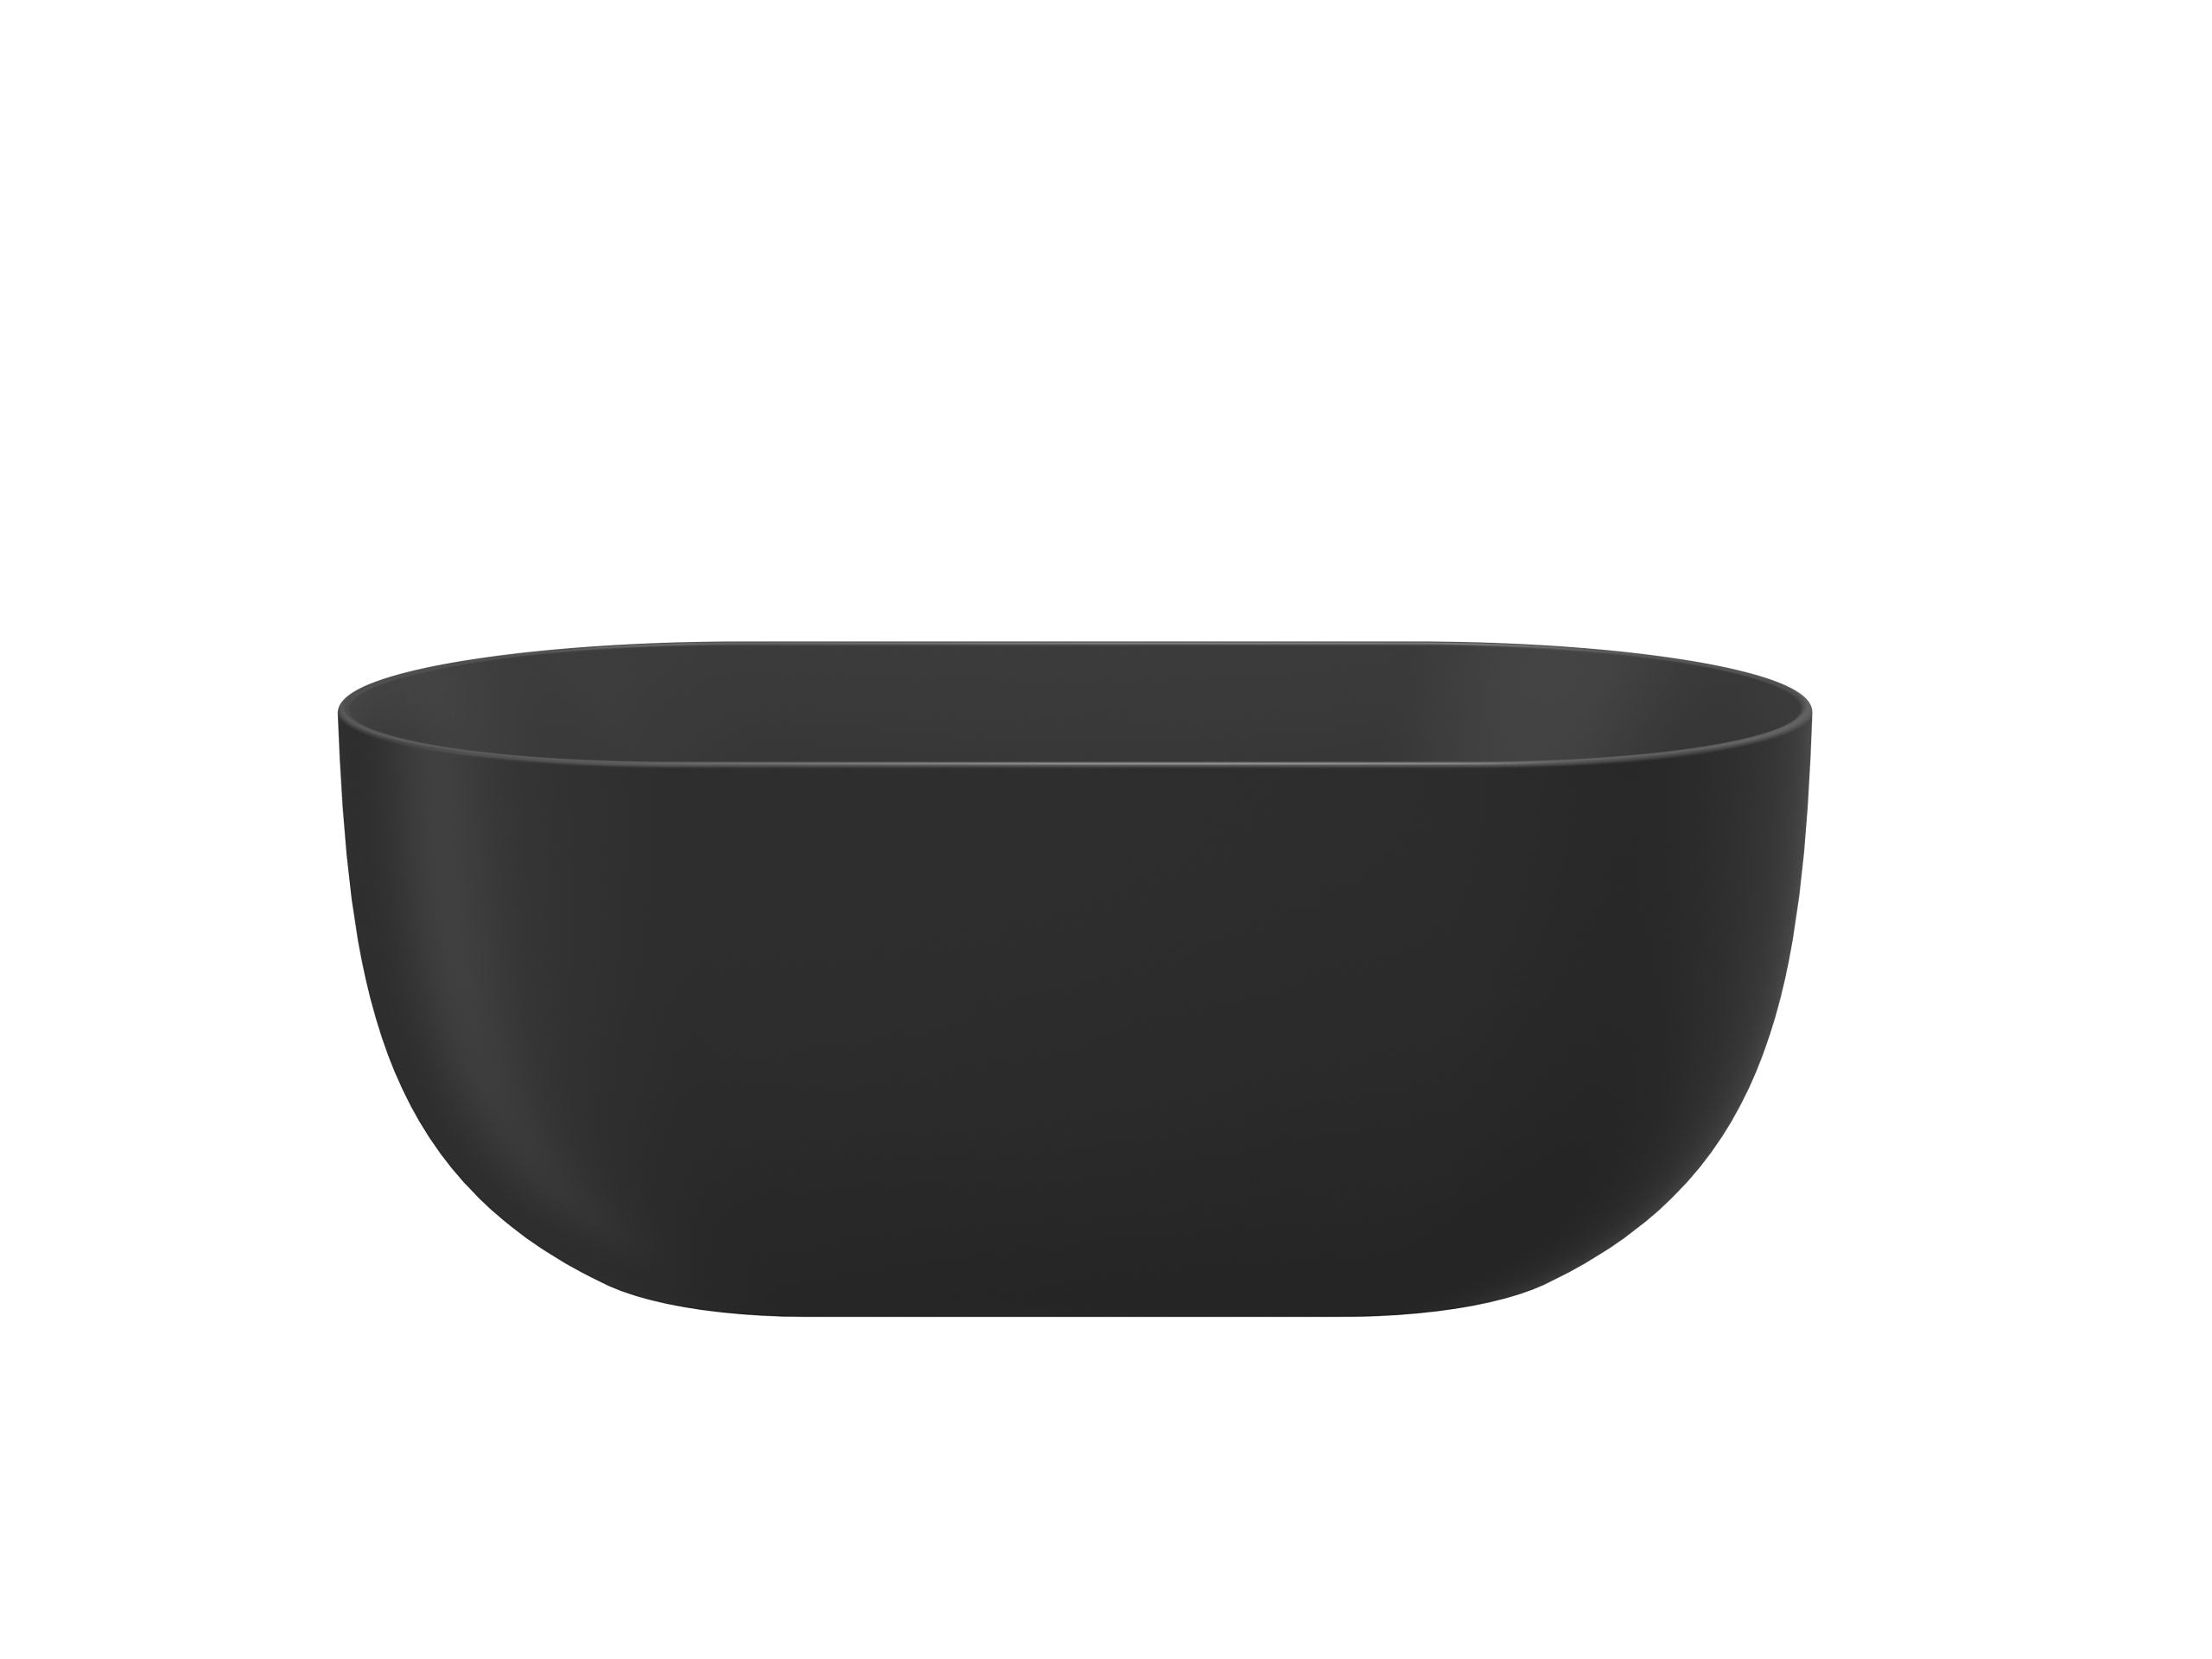 LINSOL NORA FREESTANDING BATHTUB MATTE BLACK (AVAILABLE IN 1500MM AND 1700MM)